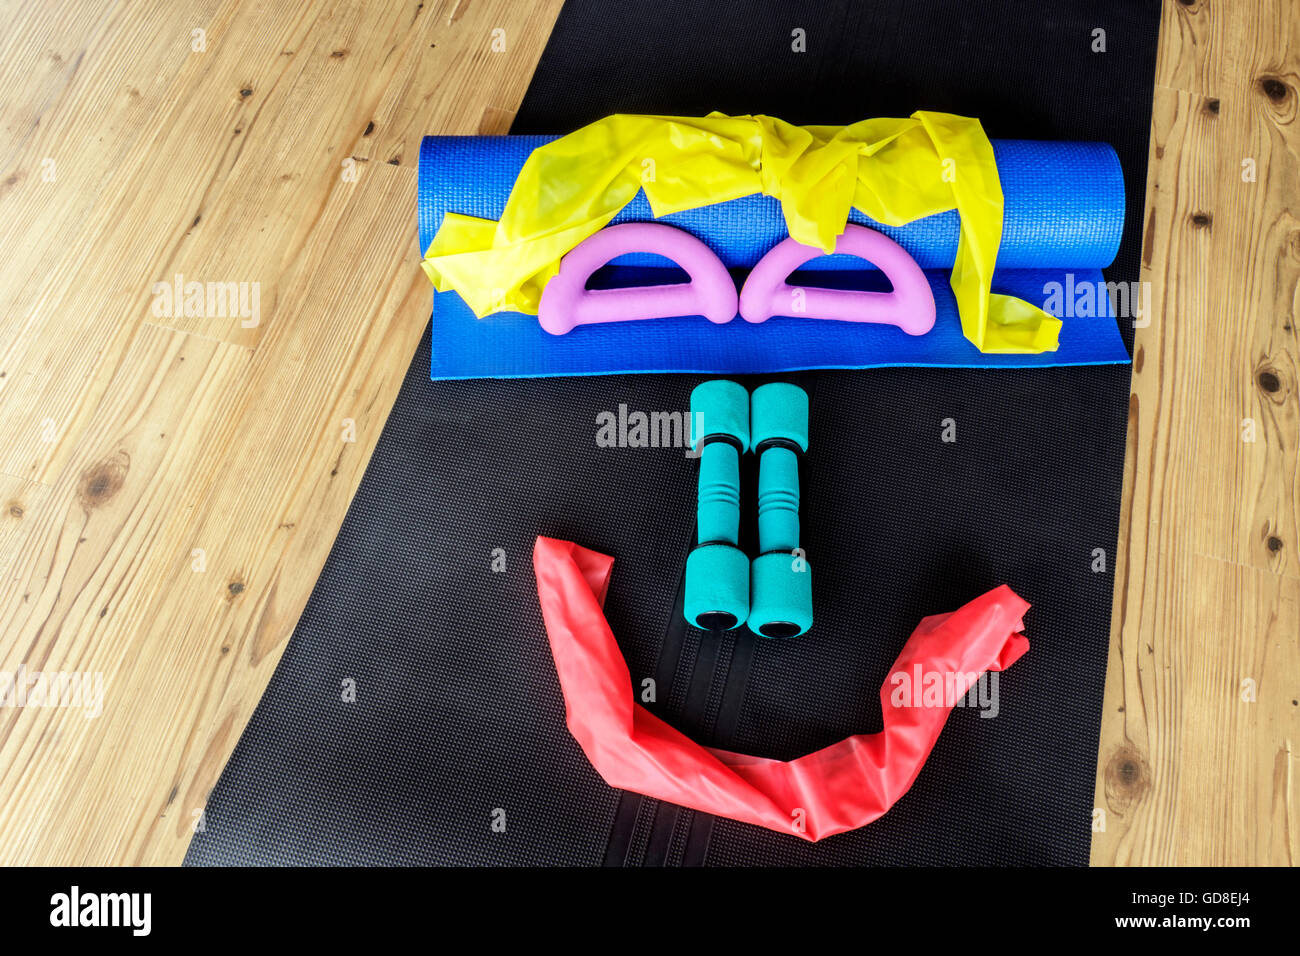 Resistance Bands And Hand Weights On Yoga Mats Set Out In A Smiley